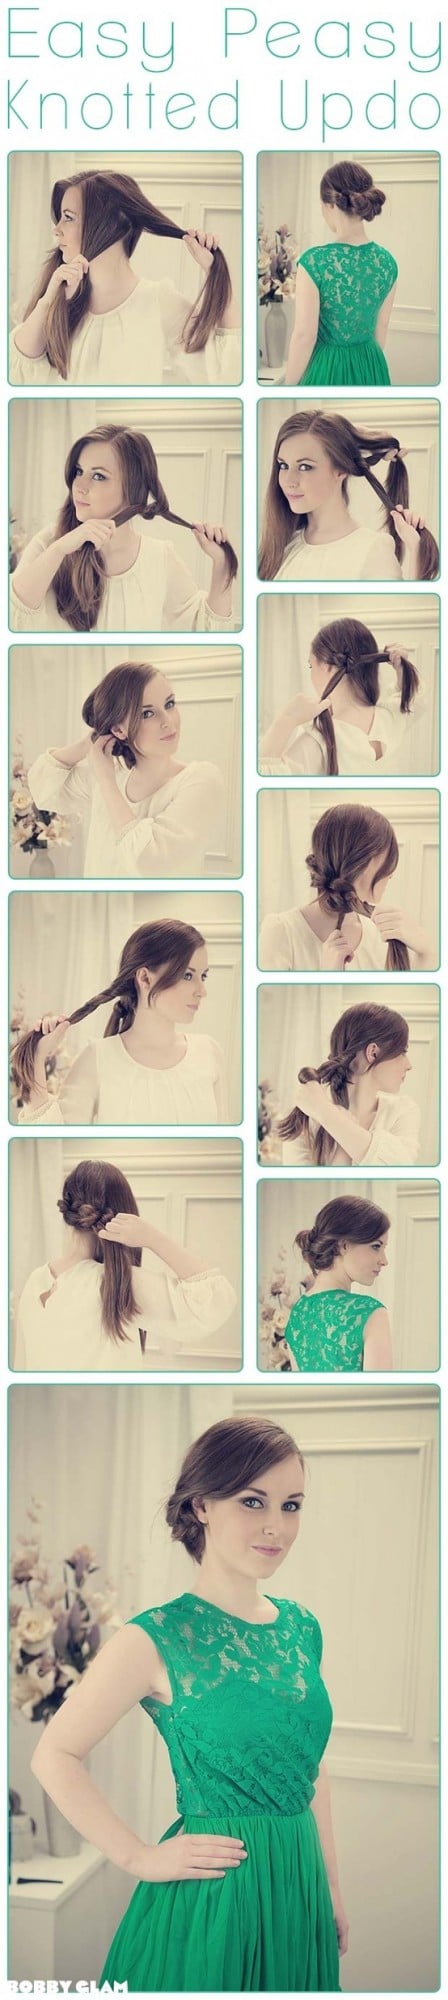 22 Simple and cute hairstyle tutorials you should definitely try it (11)